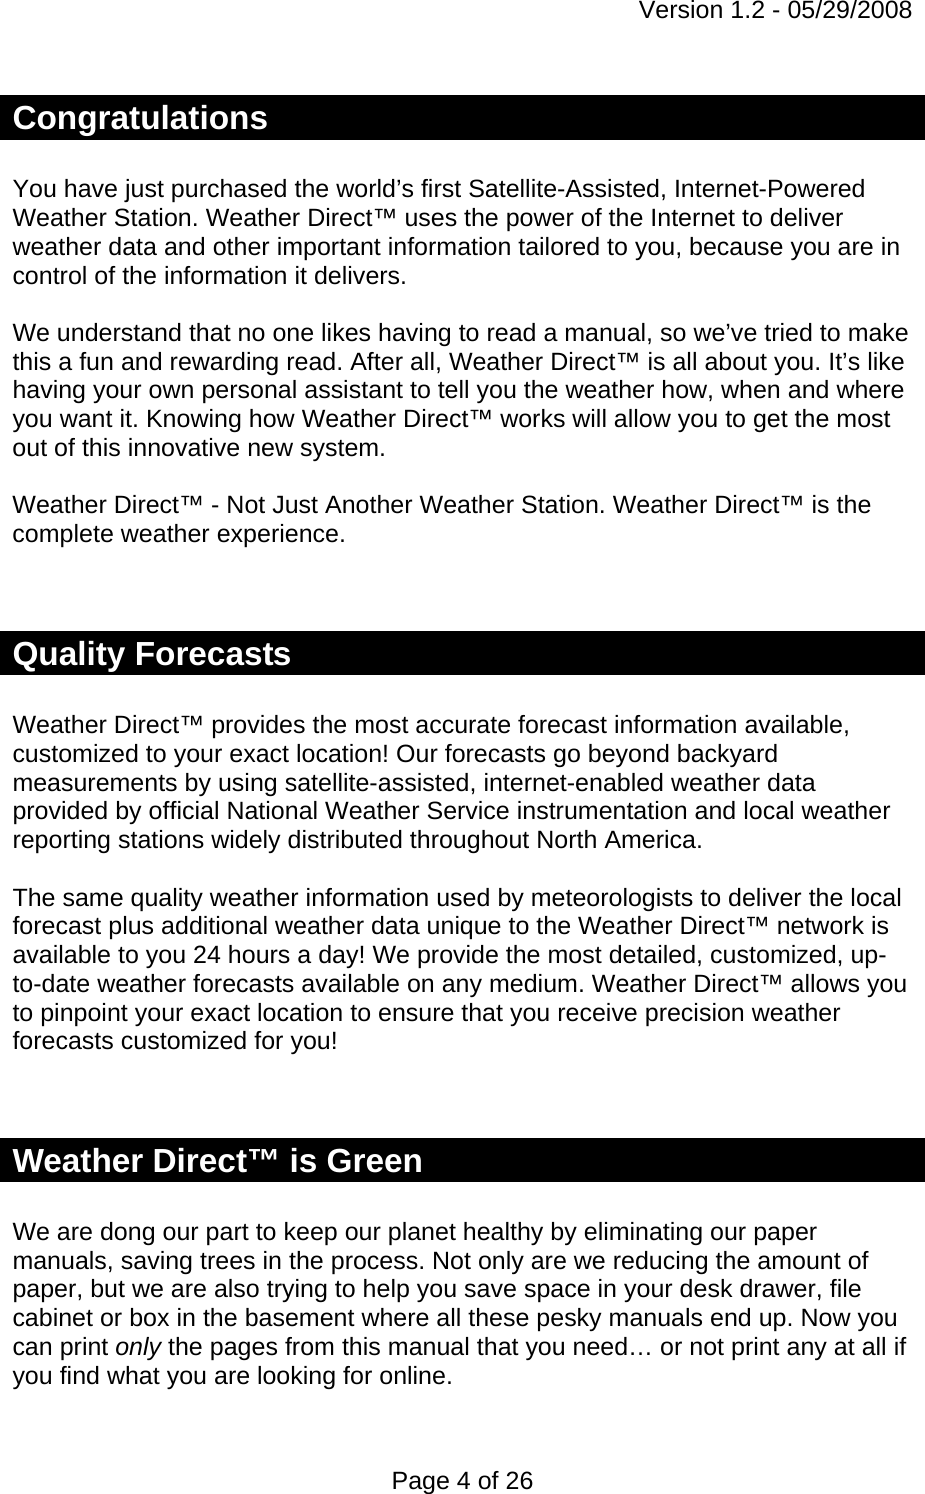 Version 1.2 - 05/29/2008 Page 4 of 26 Congratulations  You have just purchased the world’s first Satellite-Assisted, Internet-Powered Weather Station. Weather Direct™ uses the power of the Internet to deliver weather data and other important information tailored to you, because you are in control of the information it delivers.  We understand that no one likes having to read a manual, so we’ve tried to make this a fun and rewarding read. After all, Weather Direct™ is all about you. It’s like having your own personal assistant to tell you the weather how, when and where you want it. Knowing how Weather Direct™ works will allow you to get the most out of this innovative new system.   Weather Direct™ - Not Just Another Weather Station. Weather Direct™ is the complete weather experience.    Quality Forecasts  Weather Direct™ provides the most accurate forecast information available, customized to your exact location! Our forecasts go beyond backyard measurements by using satellite-assisted, internet-enabled weather data provided by official National Weather Service instrumentation and local weather reporting stations widely distributed throughout North America.   The same quality weather information used by meteorologists to deliver the local forecast plus additional weather data unique to the Weather Direct™ network is available to you 24 hours a day! We provide the most detailed, customized, up-to-date weather forecasts available on any medium. Weather Direct™ allows you to pinpoint your exact location to ensure that you receive precision weather forecasts customized for you!    Weather Direct™ is Green  We are dong our part to keep our planet healthy by eliminating our paper manuals, saving trees in the process. Not only are we reducing the amount of paper, but we are also trying to help you save space in your desk drawer, file cabinet or box in the basement where all these pesky manuals end up. Now you can print only the pages from this manual that you need… or not print any at all if you find what you are looking for online.  